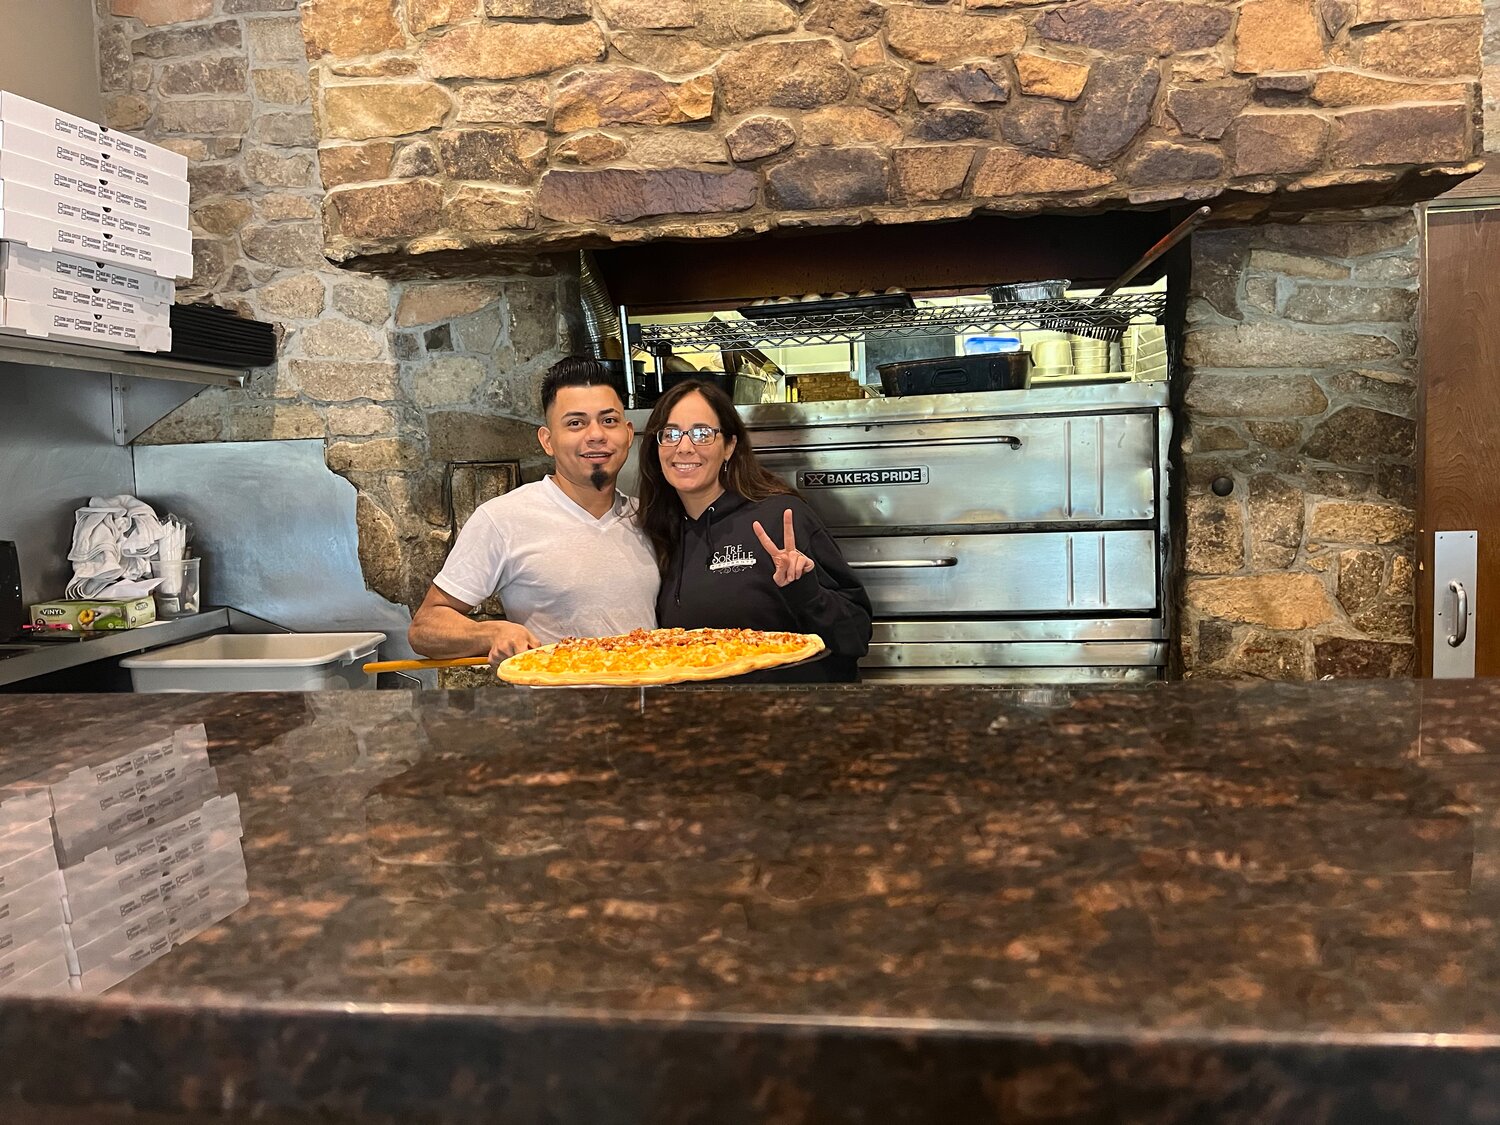 Summer Butindari, right, co-owner of Tre Sorelle, helped raise money for the fundraiser by selling pizzas with the help of her "main pie man" Alvaro Panameno.